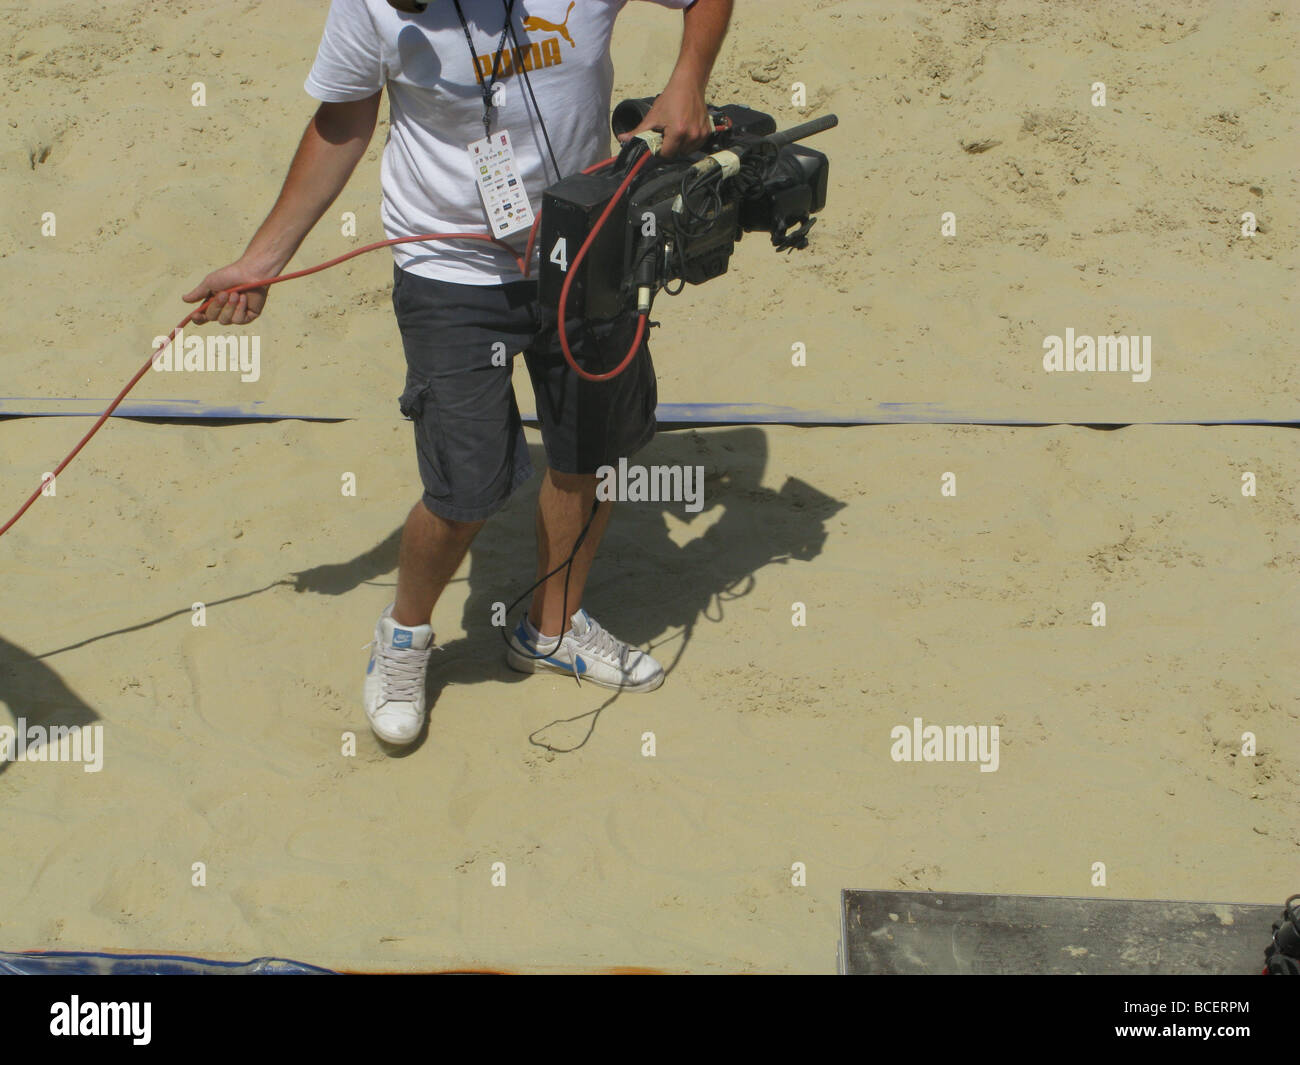 man with tv camera filming at beach event Stock Photo